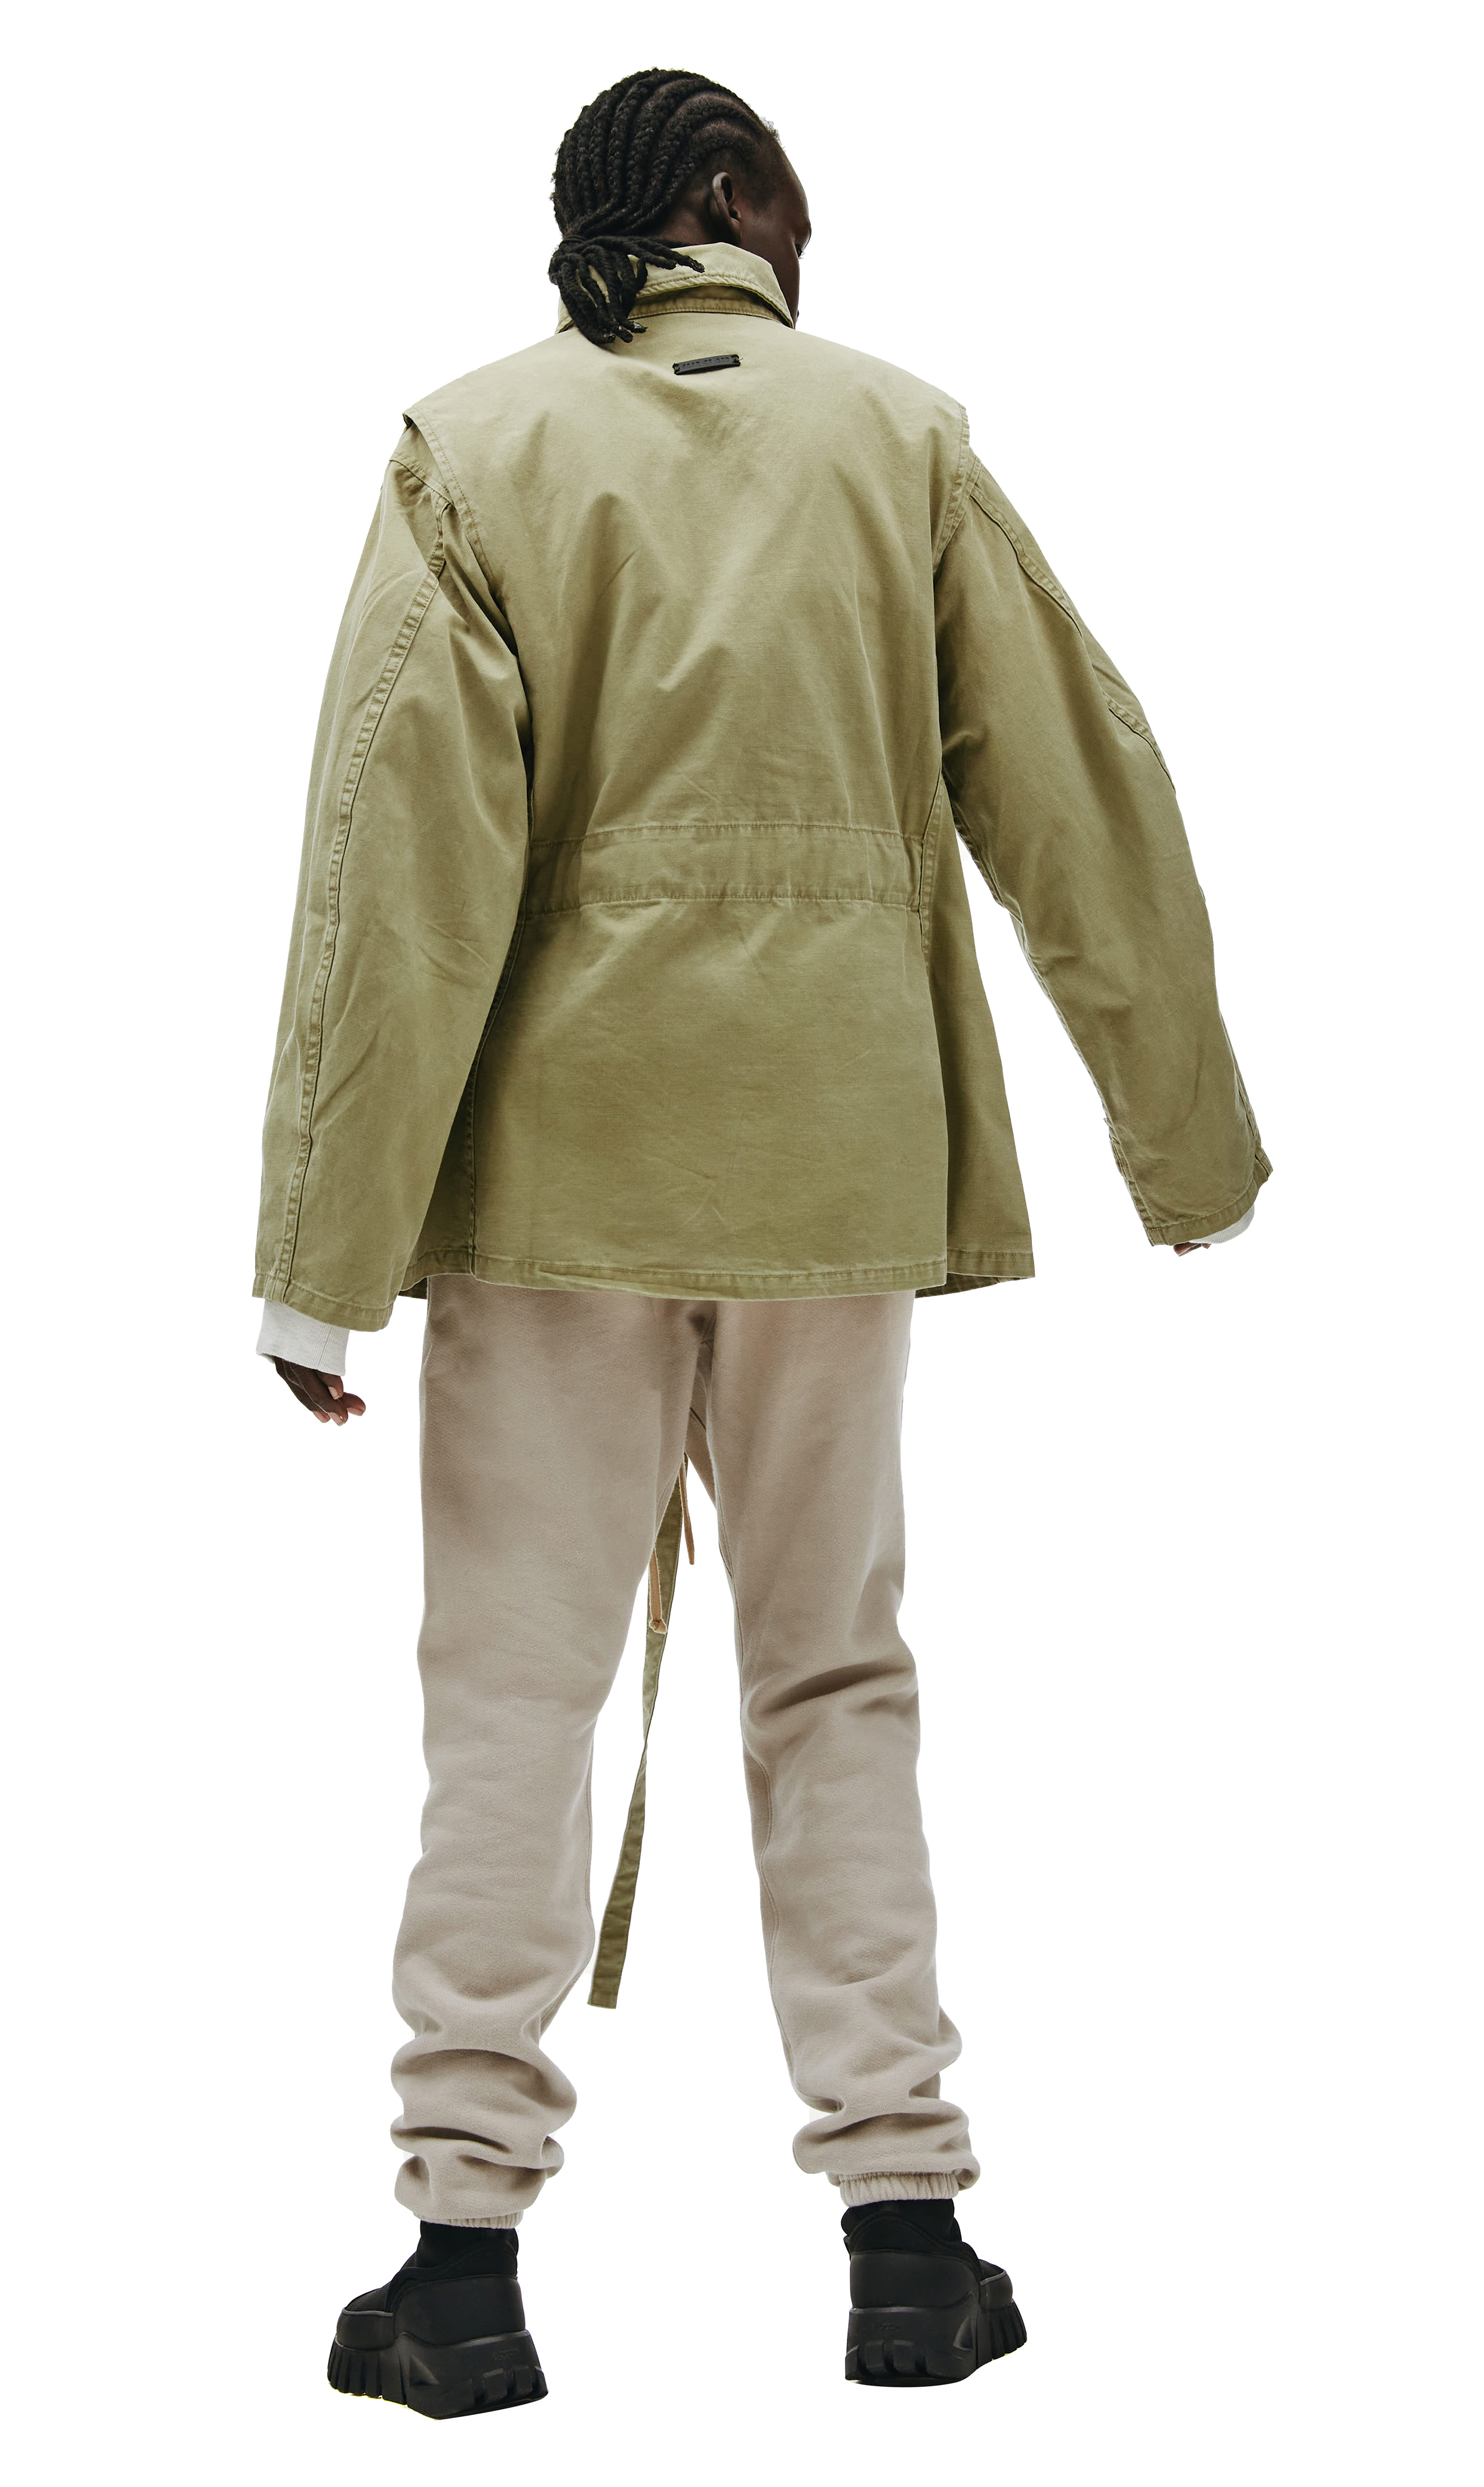 Buy Fear of God women khaki belted cotton jacket in army for